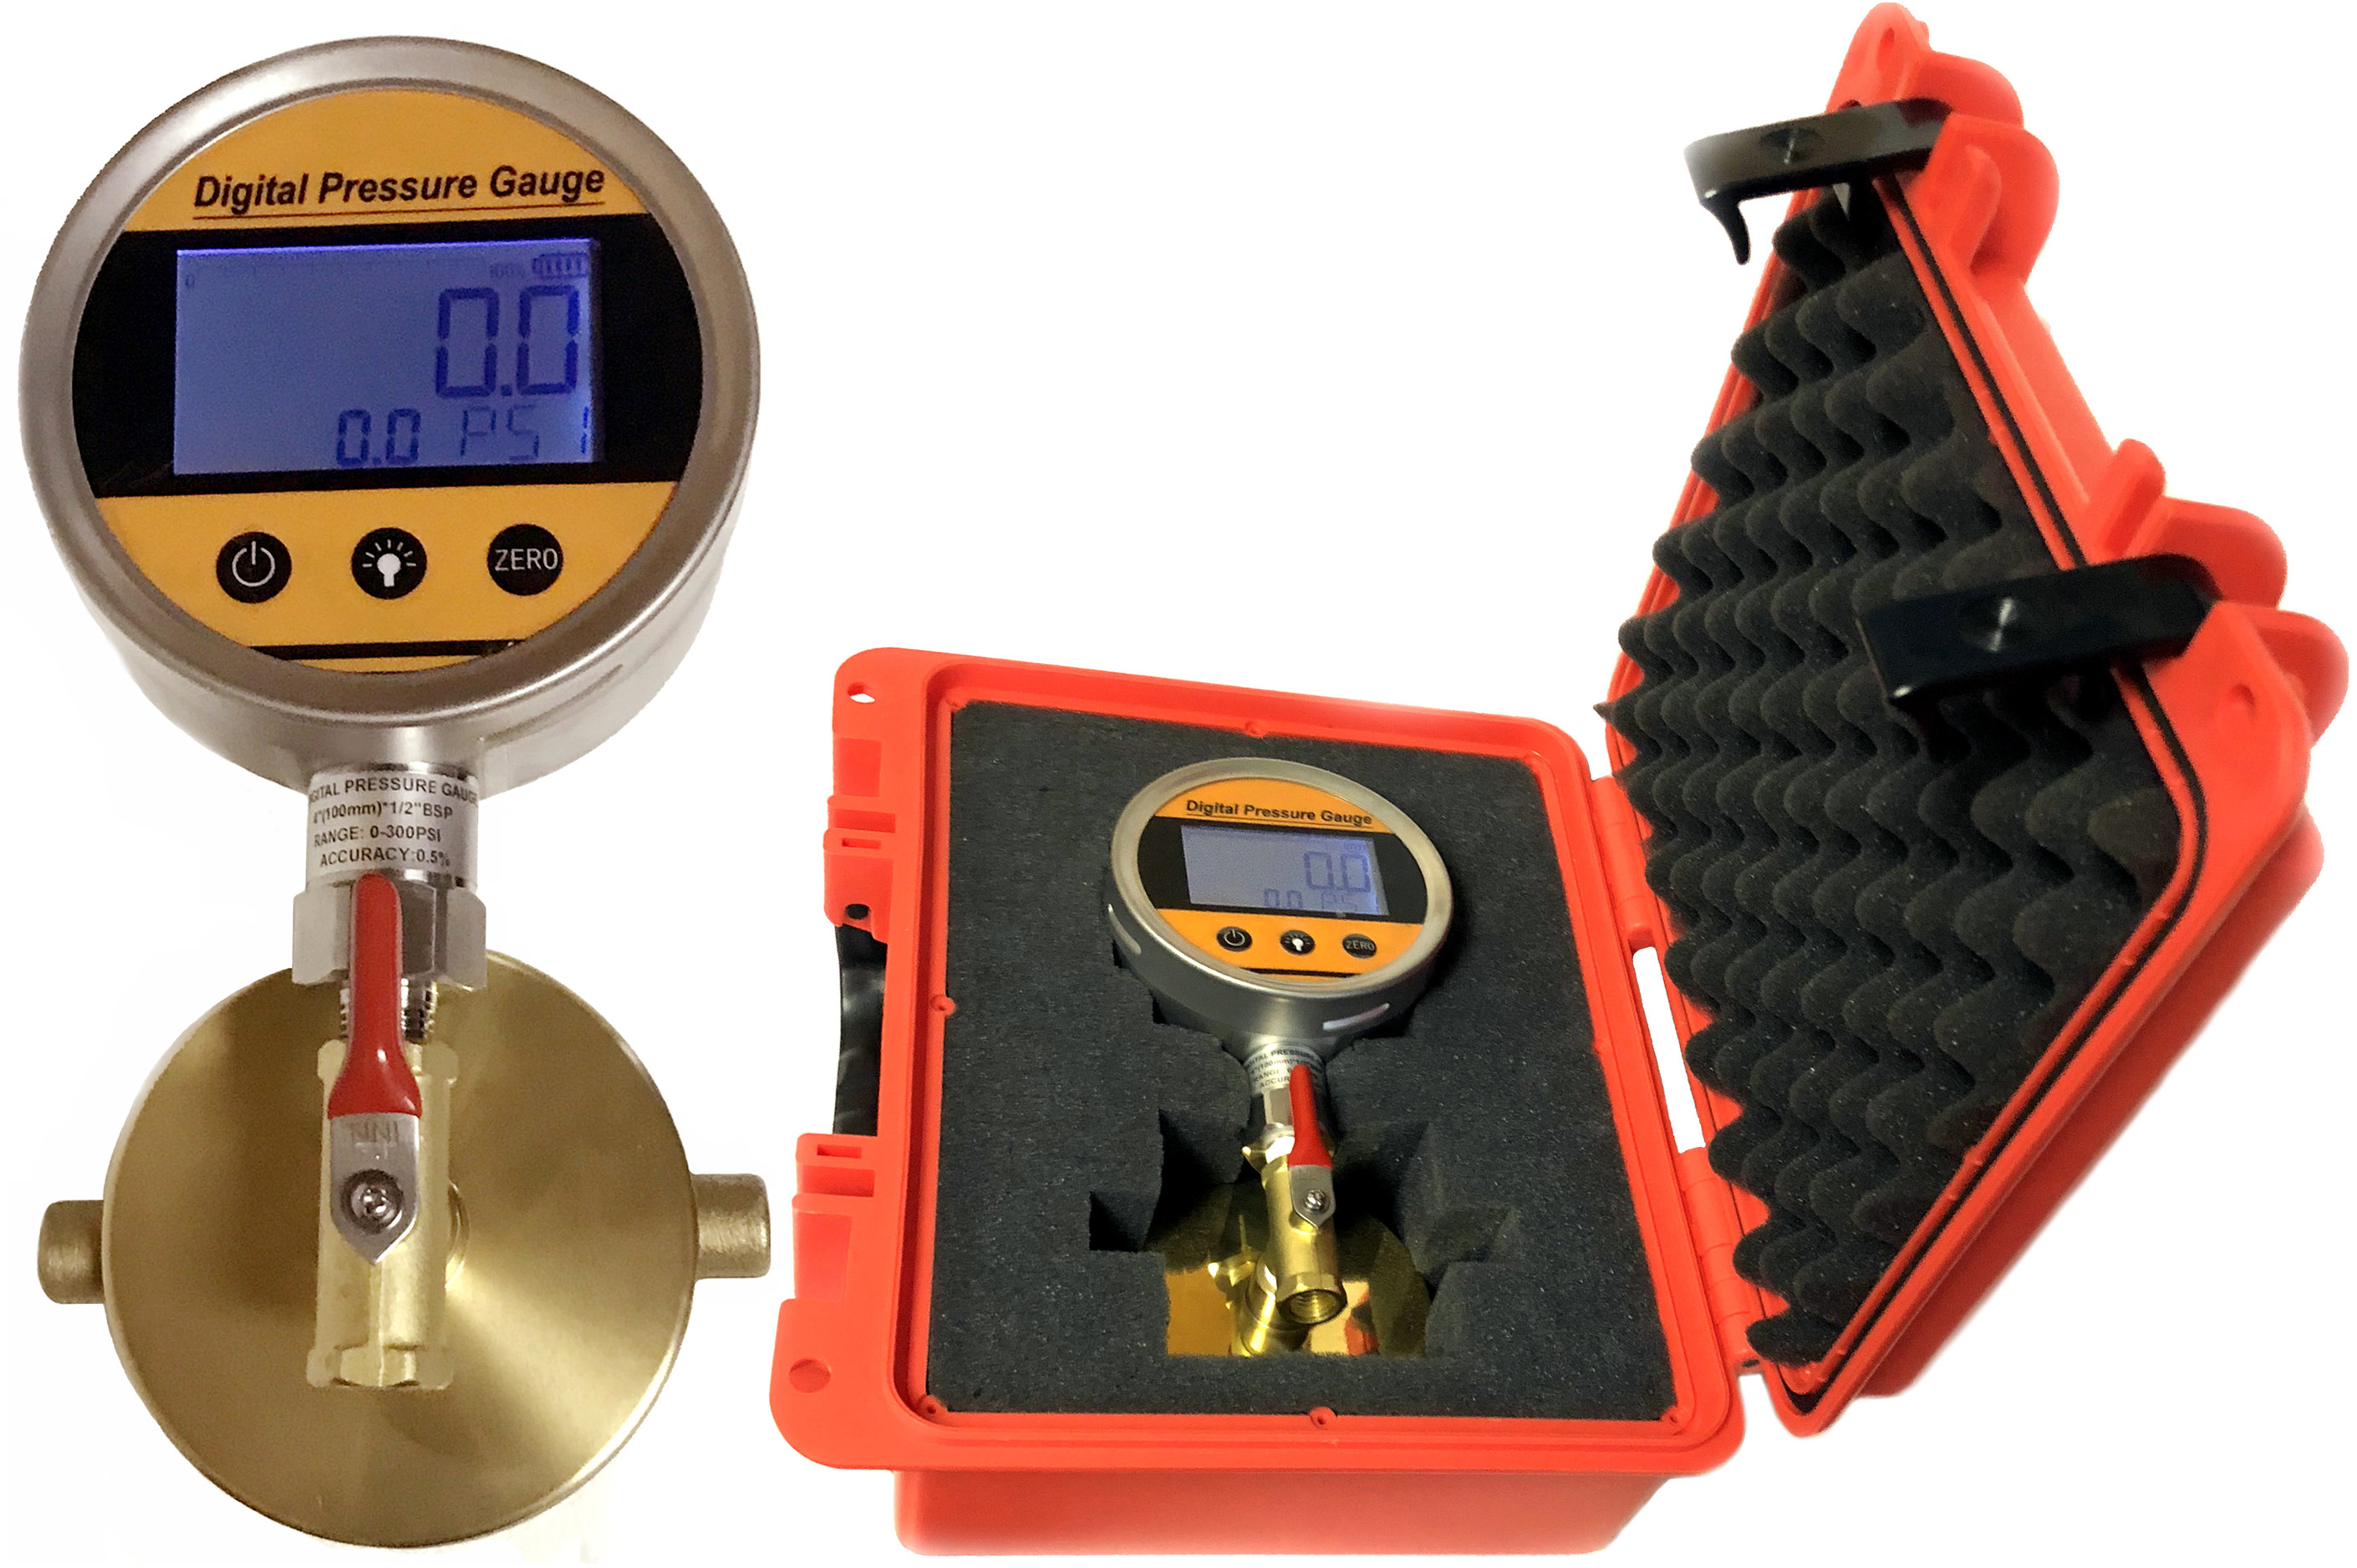 NNI Fire Hydrant Quick connect Static Pressure Gauge with Draincock 100 Psi 